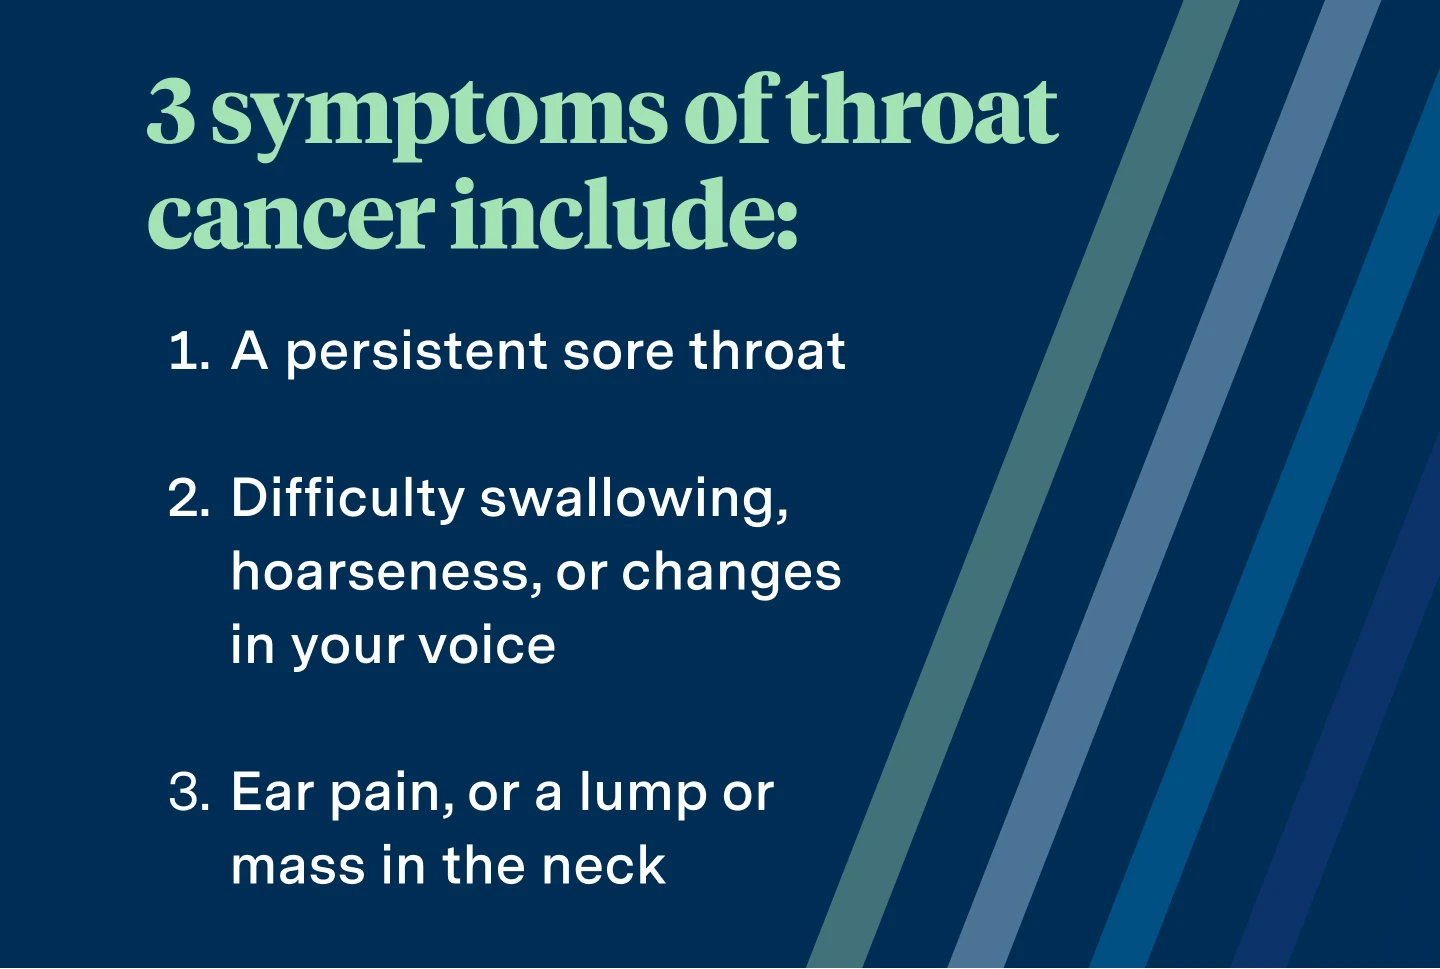 3 symptoms of throat cancer include: a persistent sore throat, difficulty swallowing, hoarseness, or changes in your voice, ear pain, or a lump or mass in the neck. 